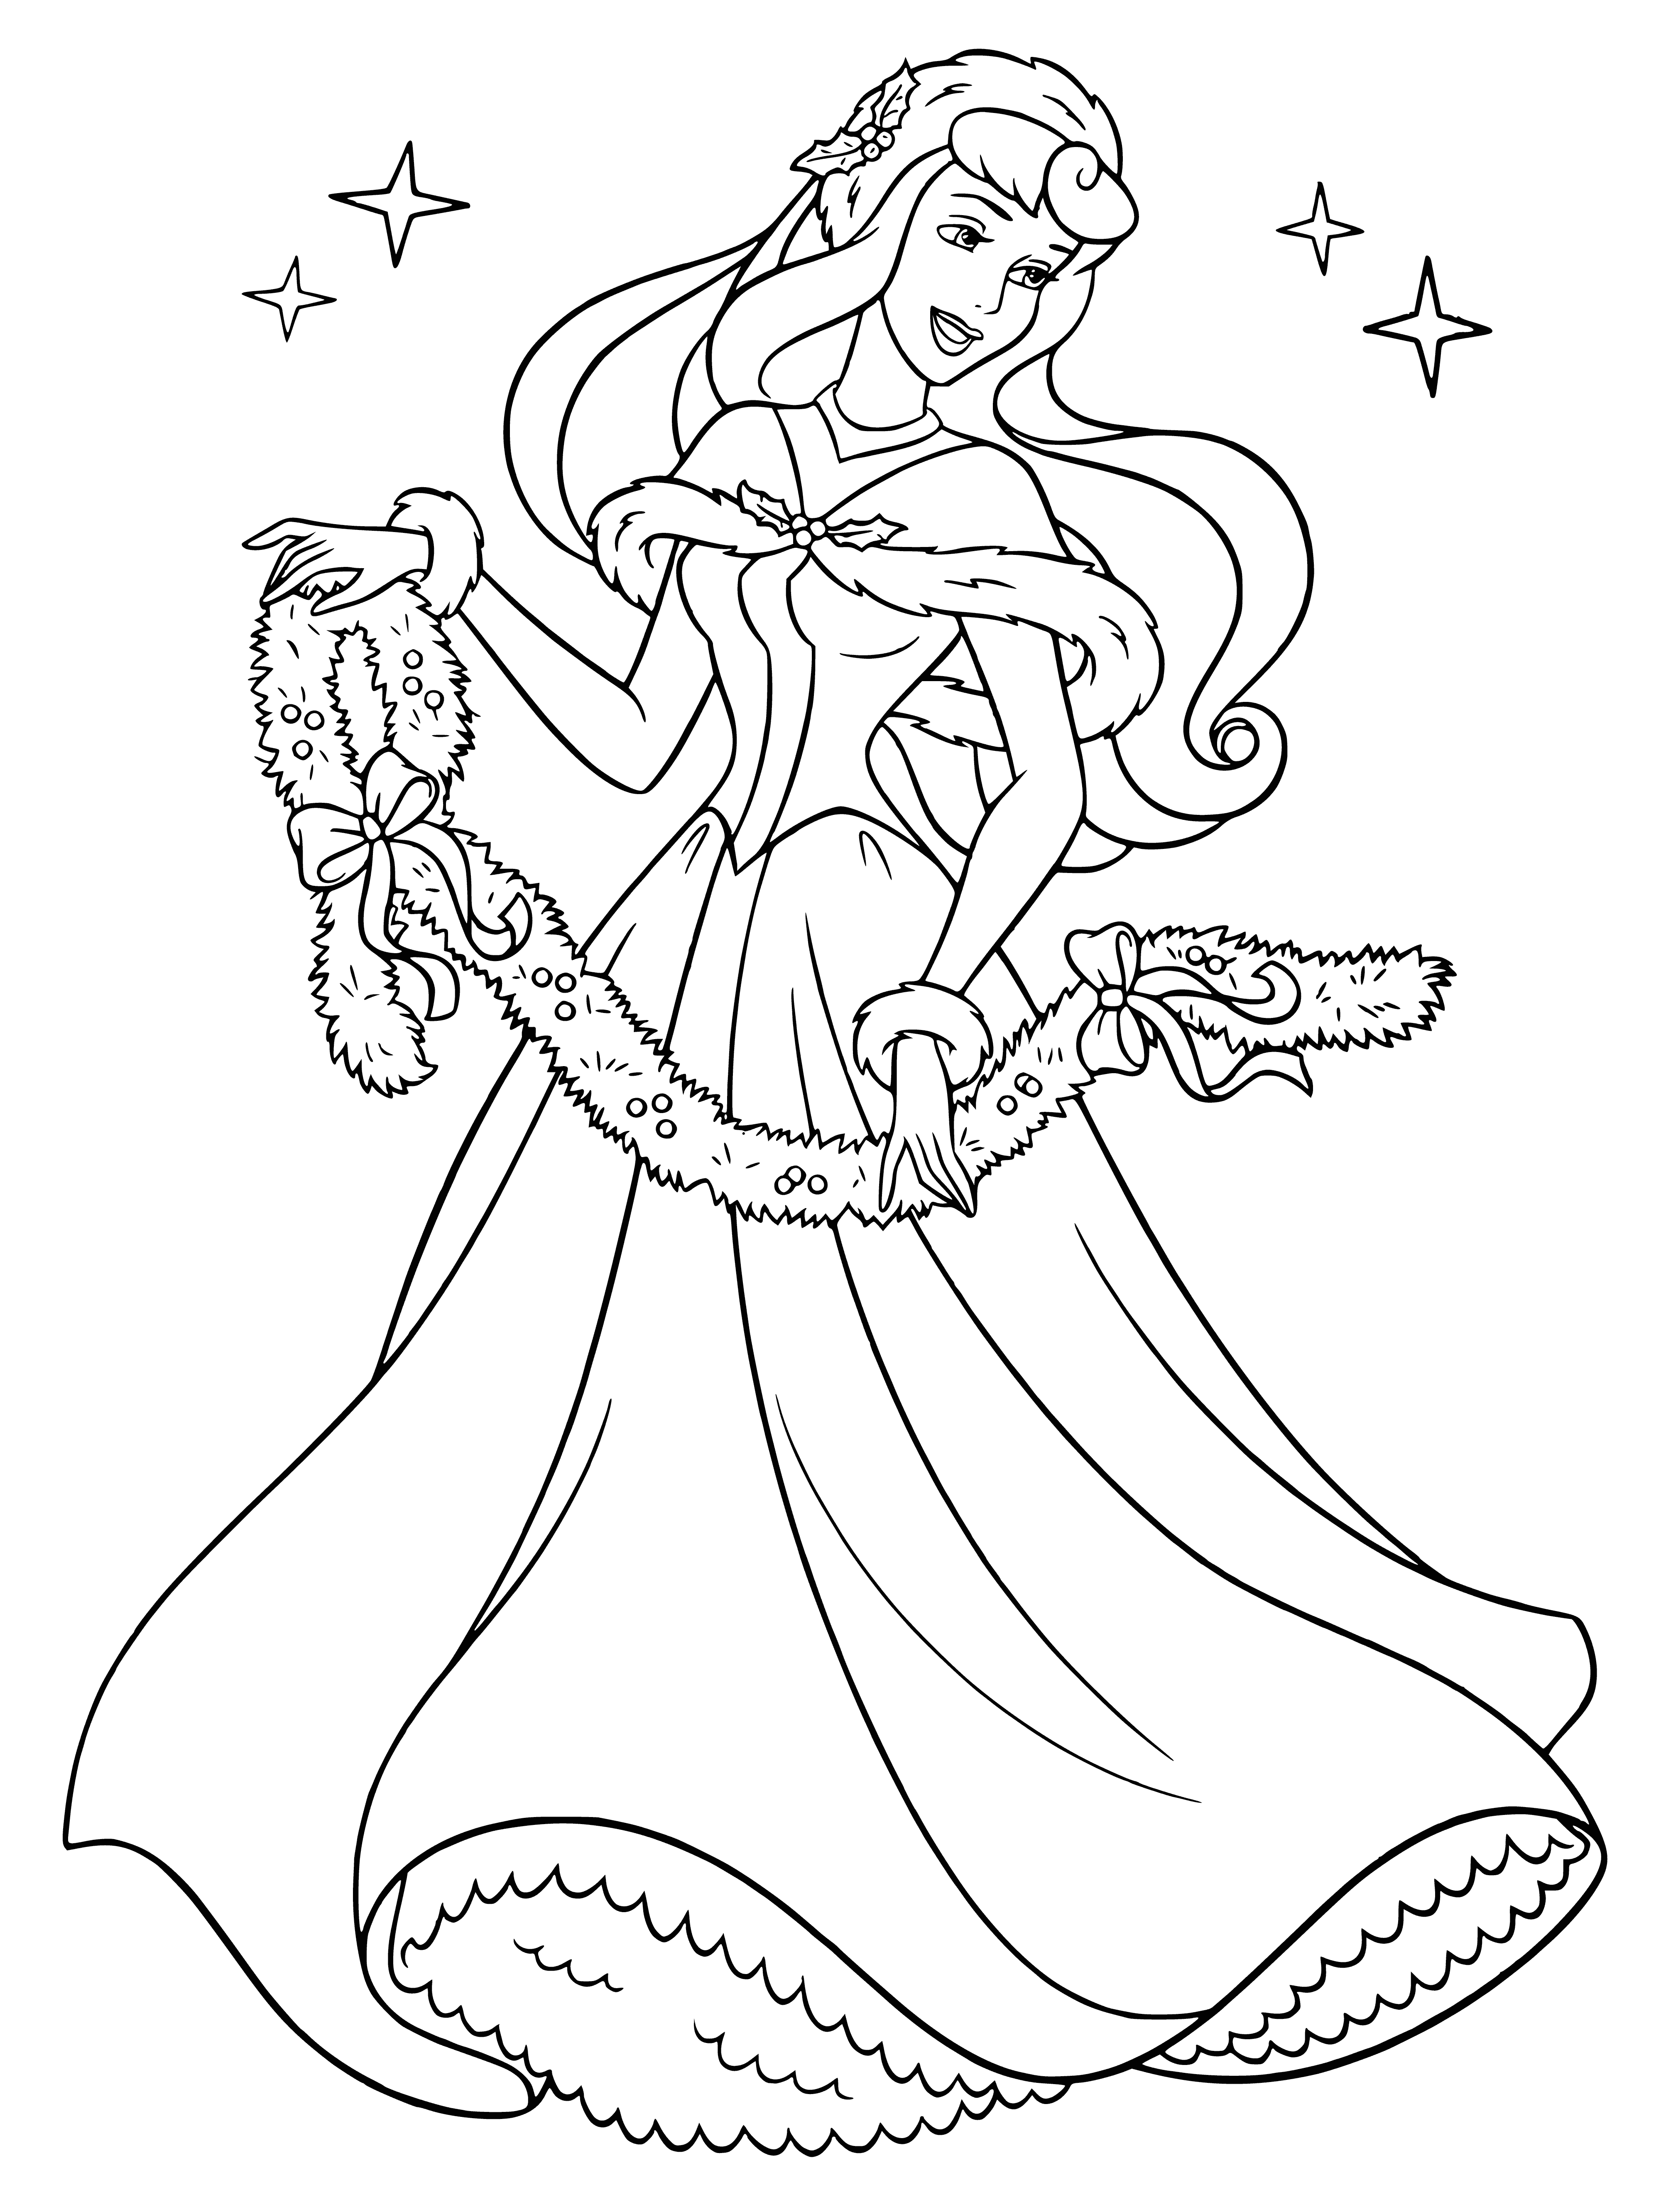 coloring page: Disney princesses celebrating New Year: Aurora in winter outfit, snow outside window. Princesses wearing hats & Aurora holds glass of champagne, smiling.